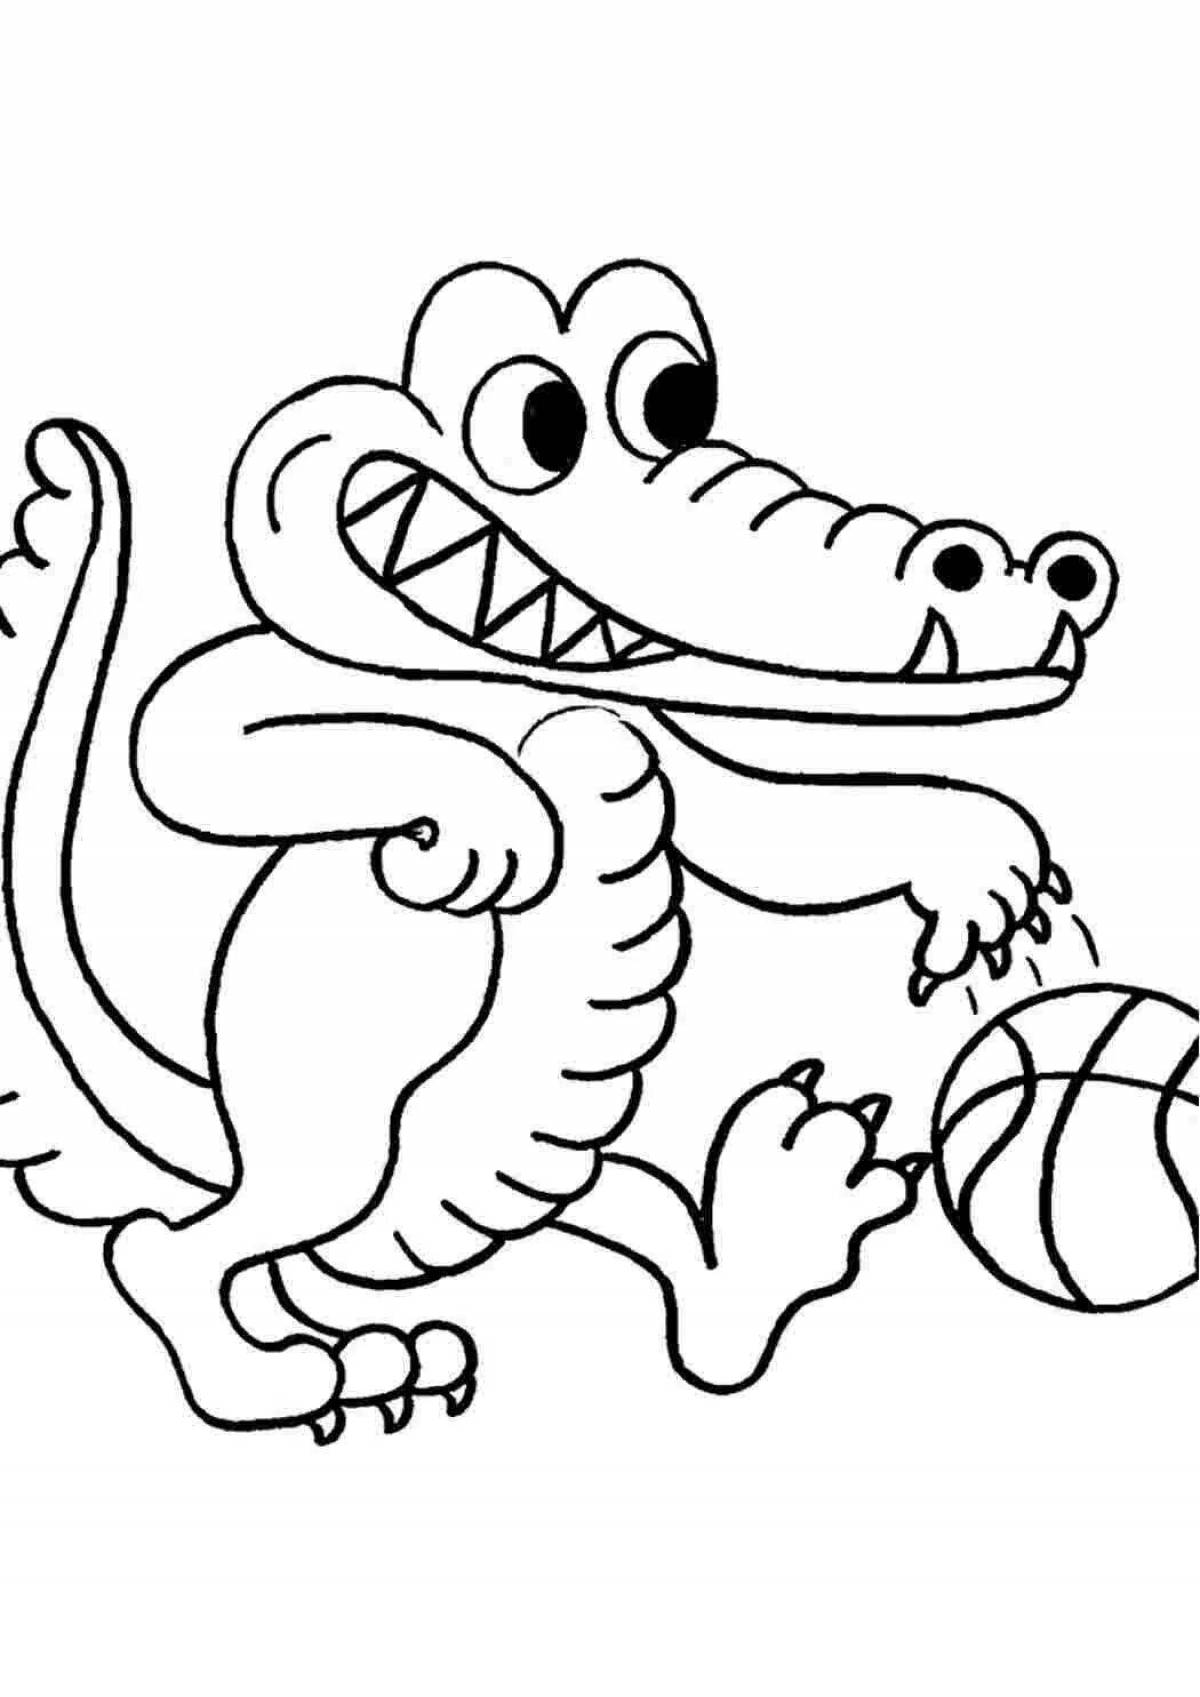 Creative crocodile coloring book for 3-4 year olds